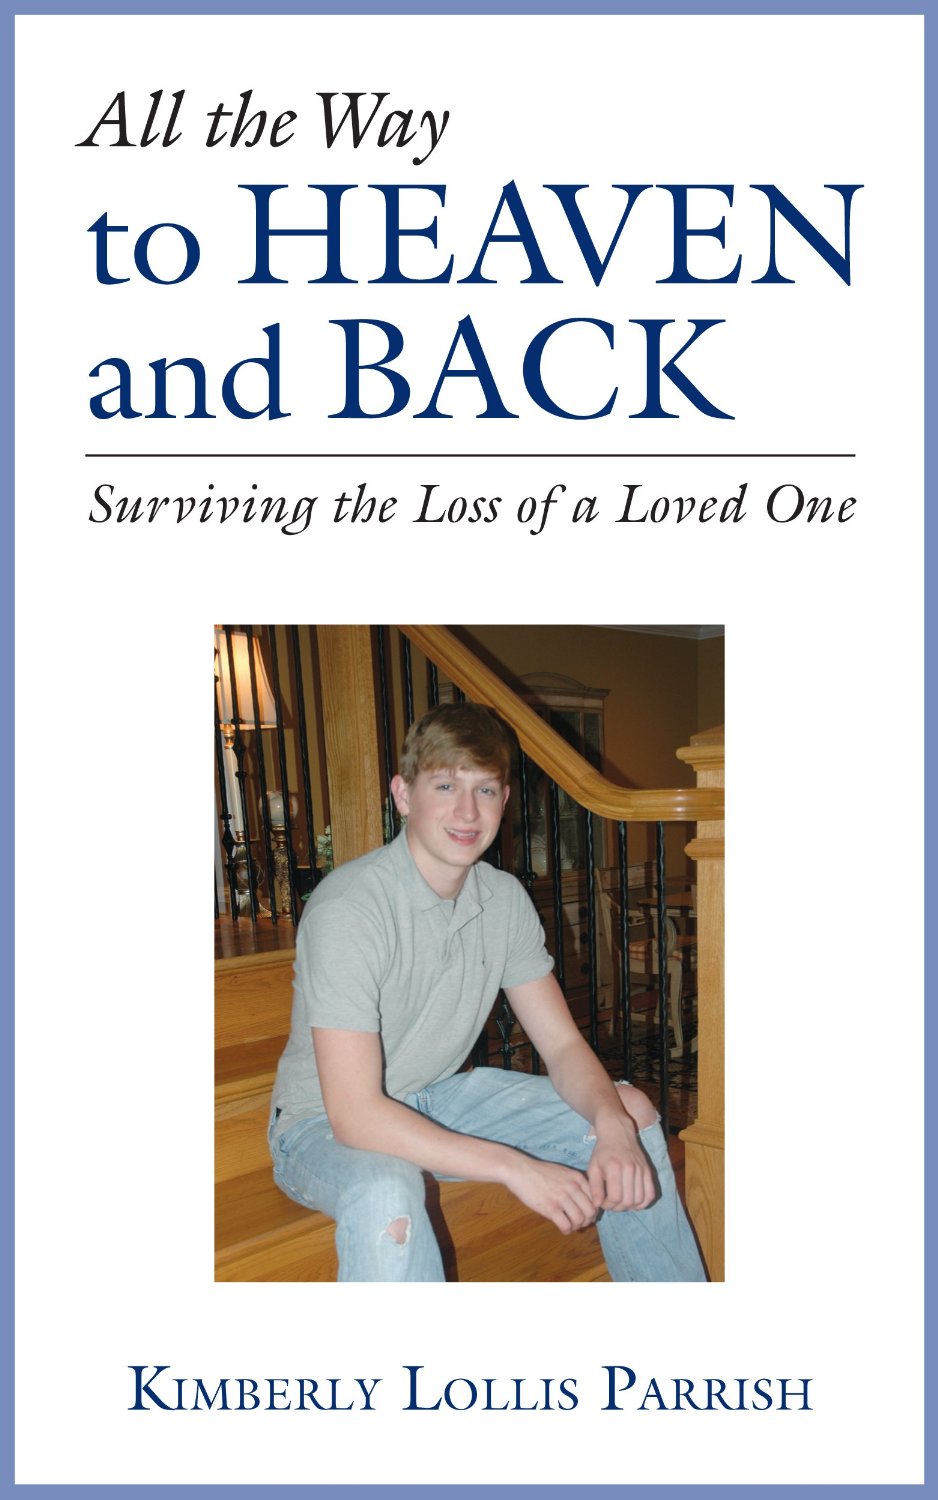 All the Way to Heaven and Back: Surviving the Loss of a Loved One by Kimberly Lollis Parrish